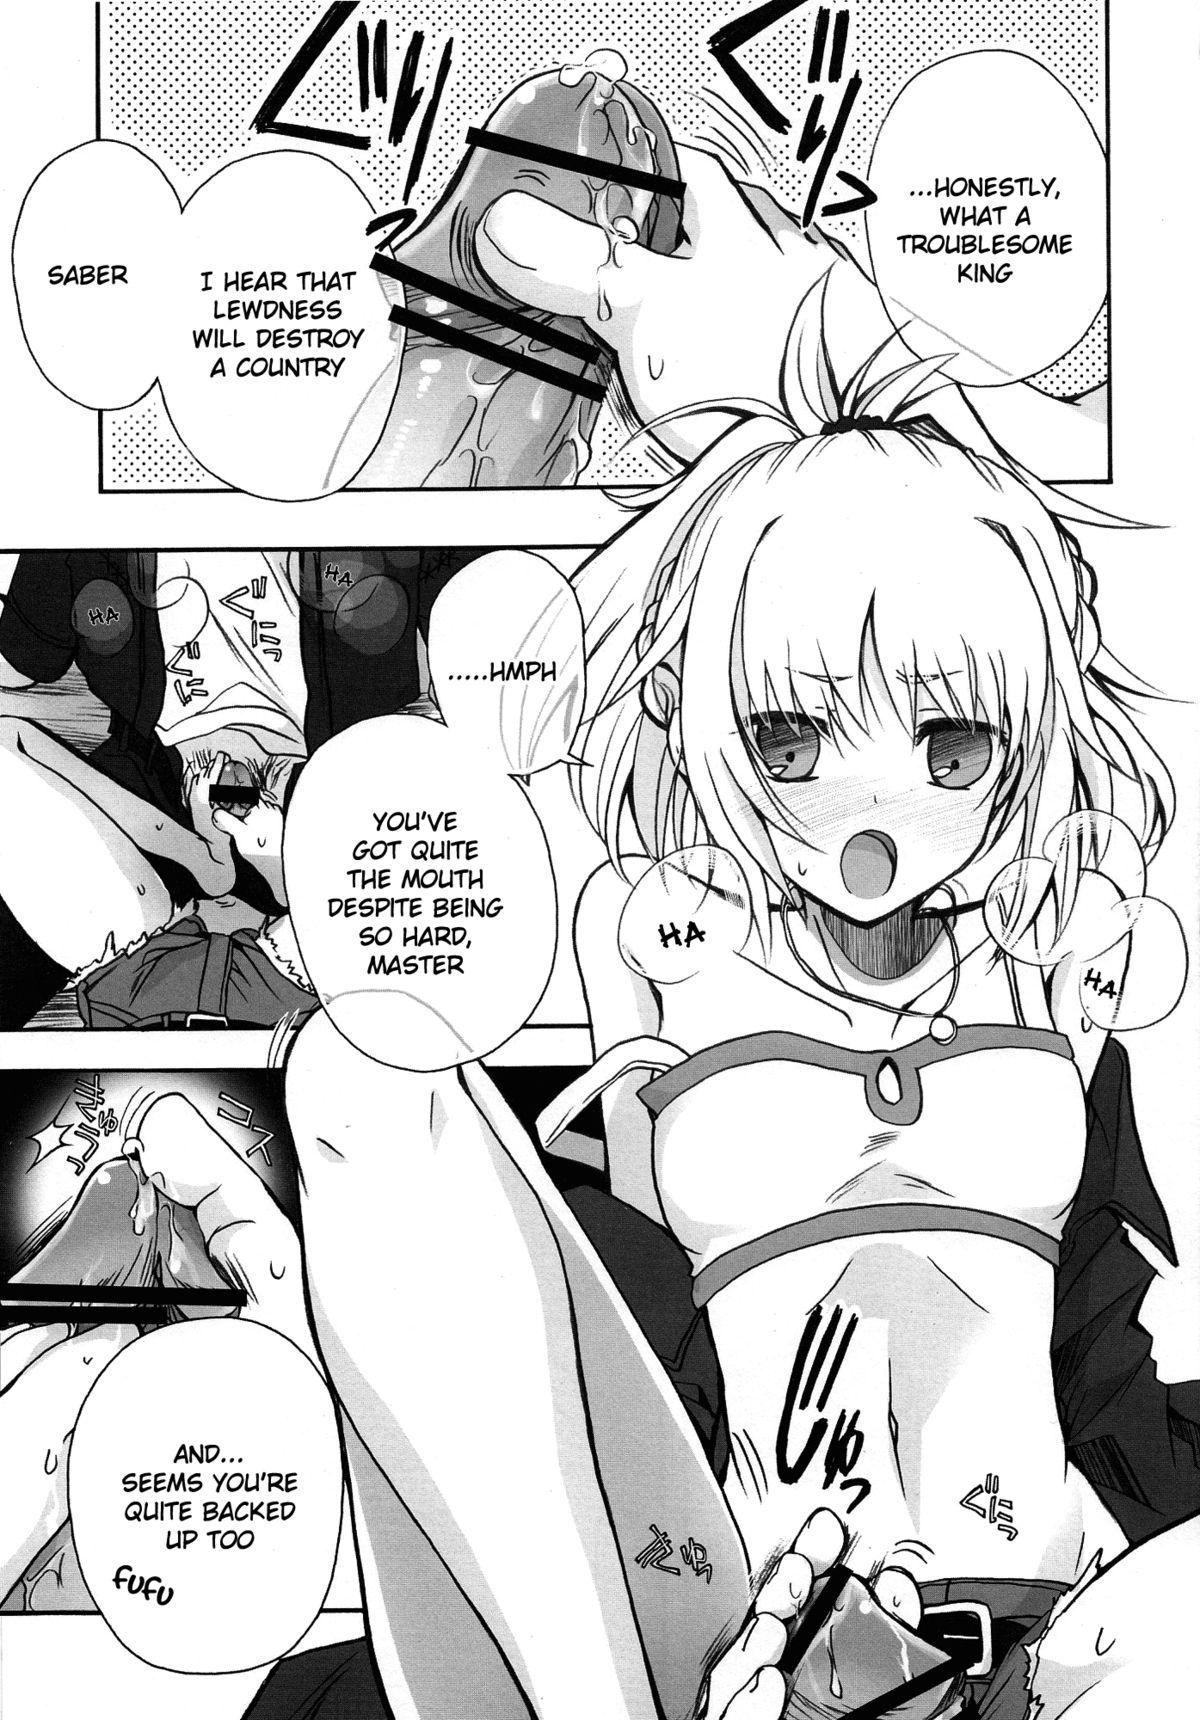 Old Vs Young Ousama no Iu Toori! - Fate apocrypha Best Blowjobs Ever - Page 6